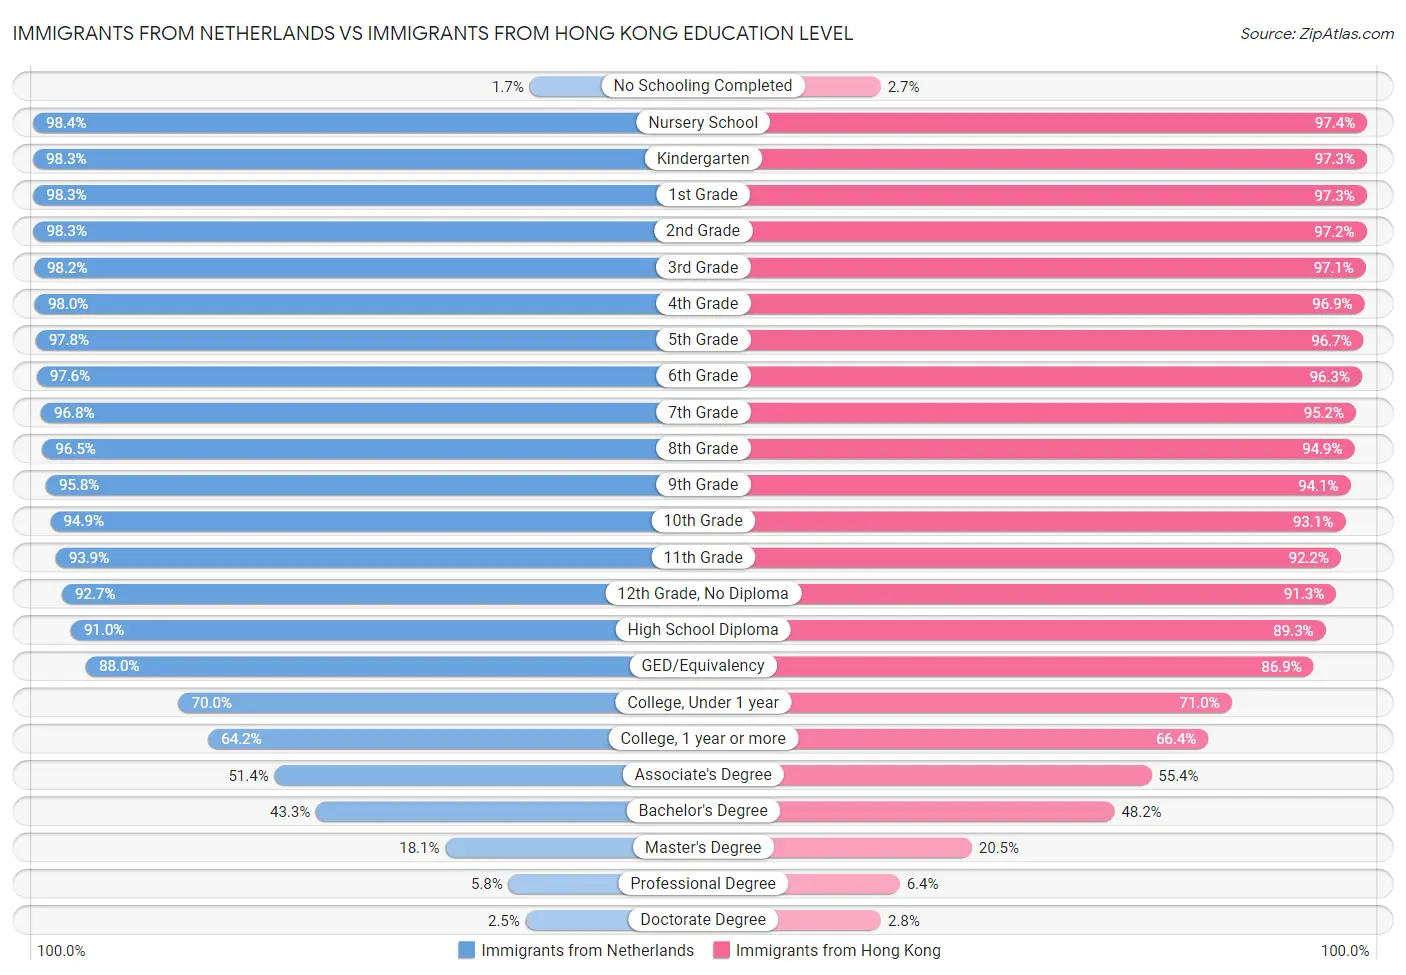 Immigrants from Netherlands vs Immigrants from Hong Kong Education Level